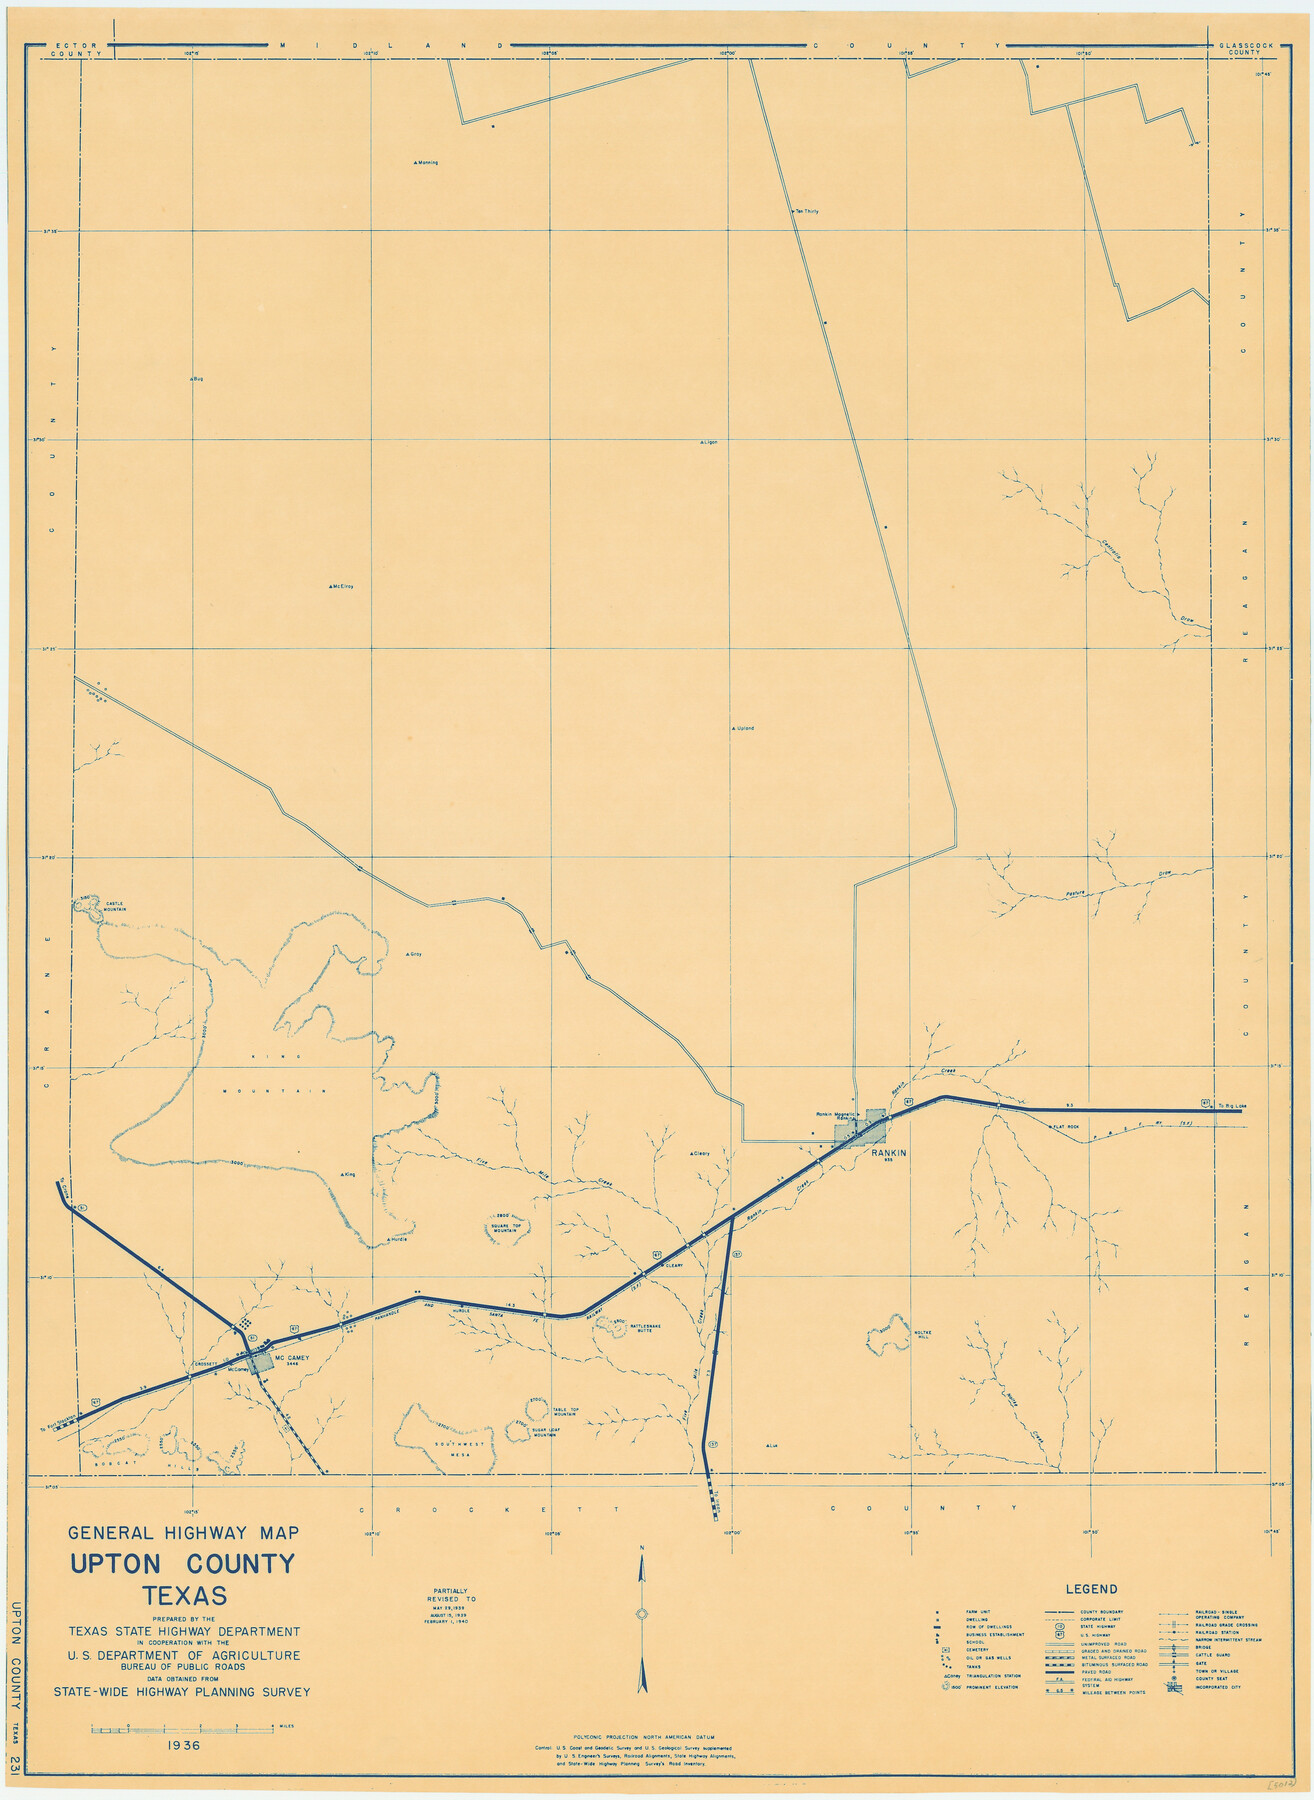 79265, General Highway Map, Upton County, Texas, Texas State Library and Archives